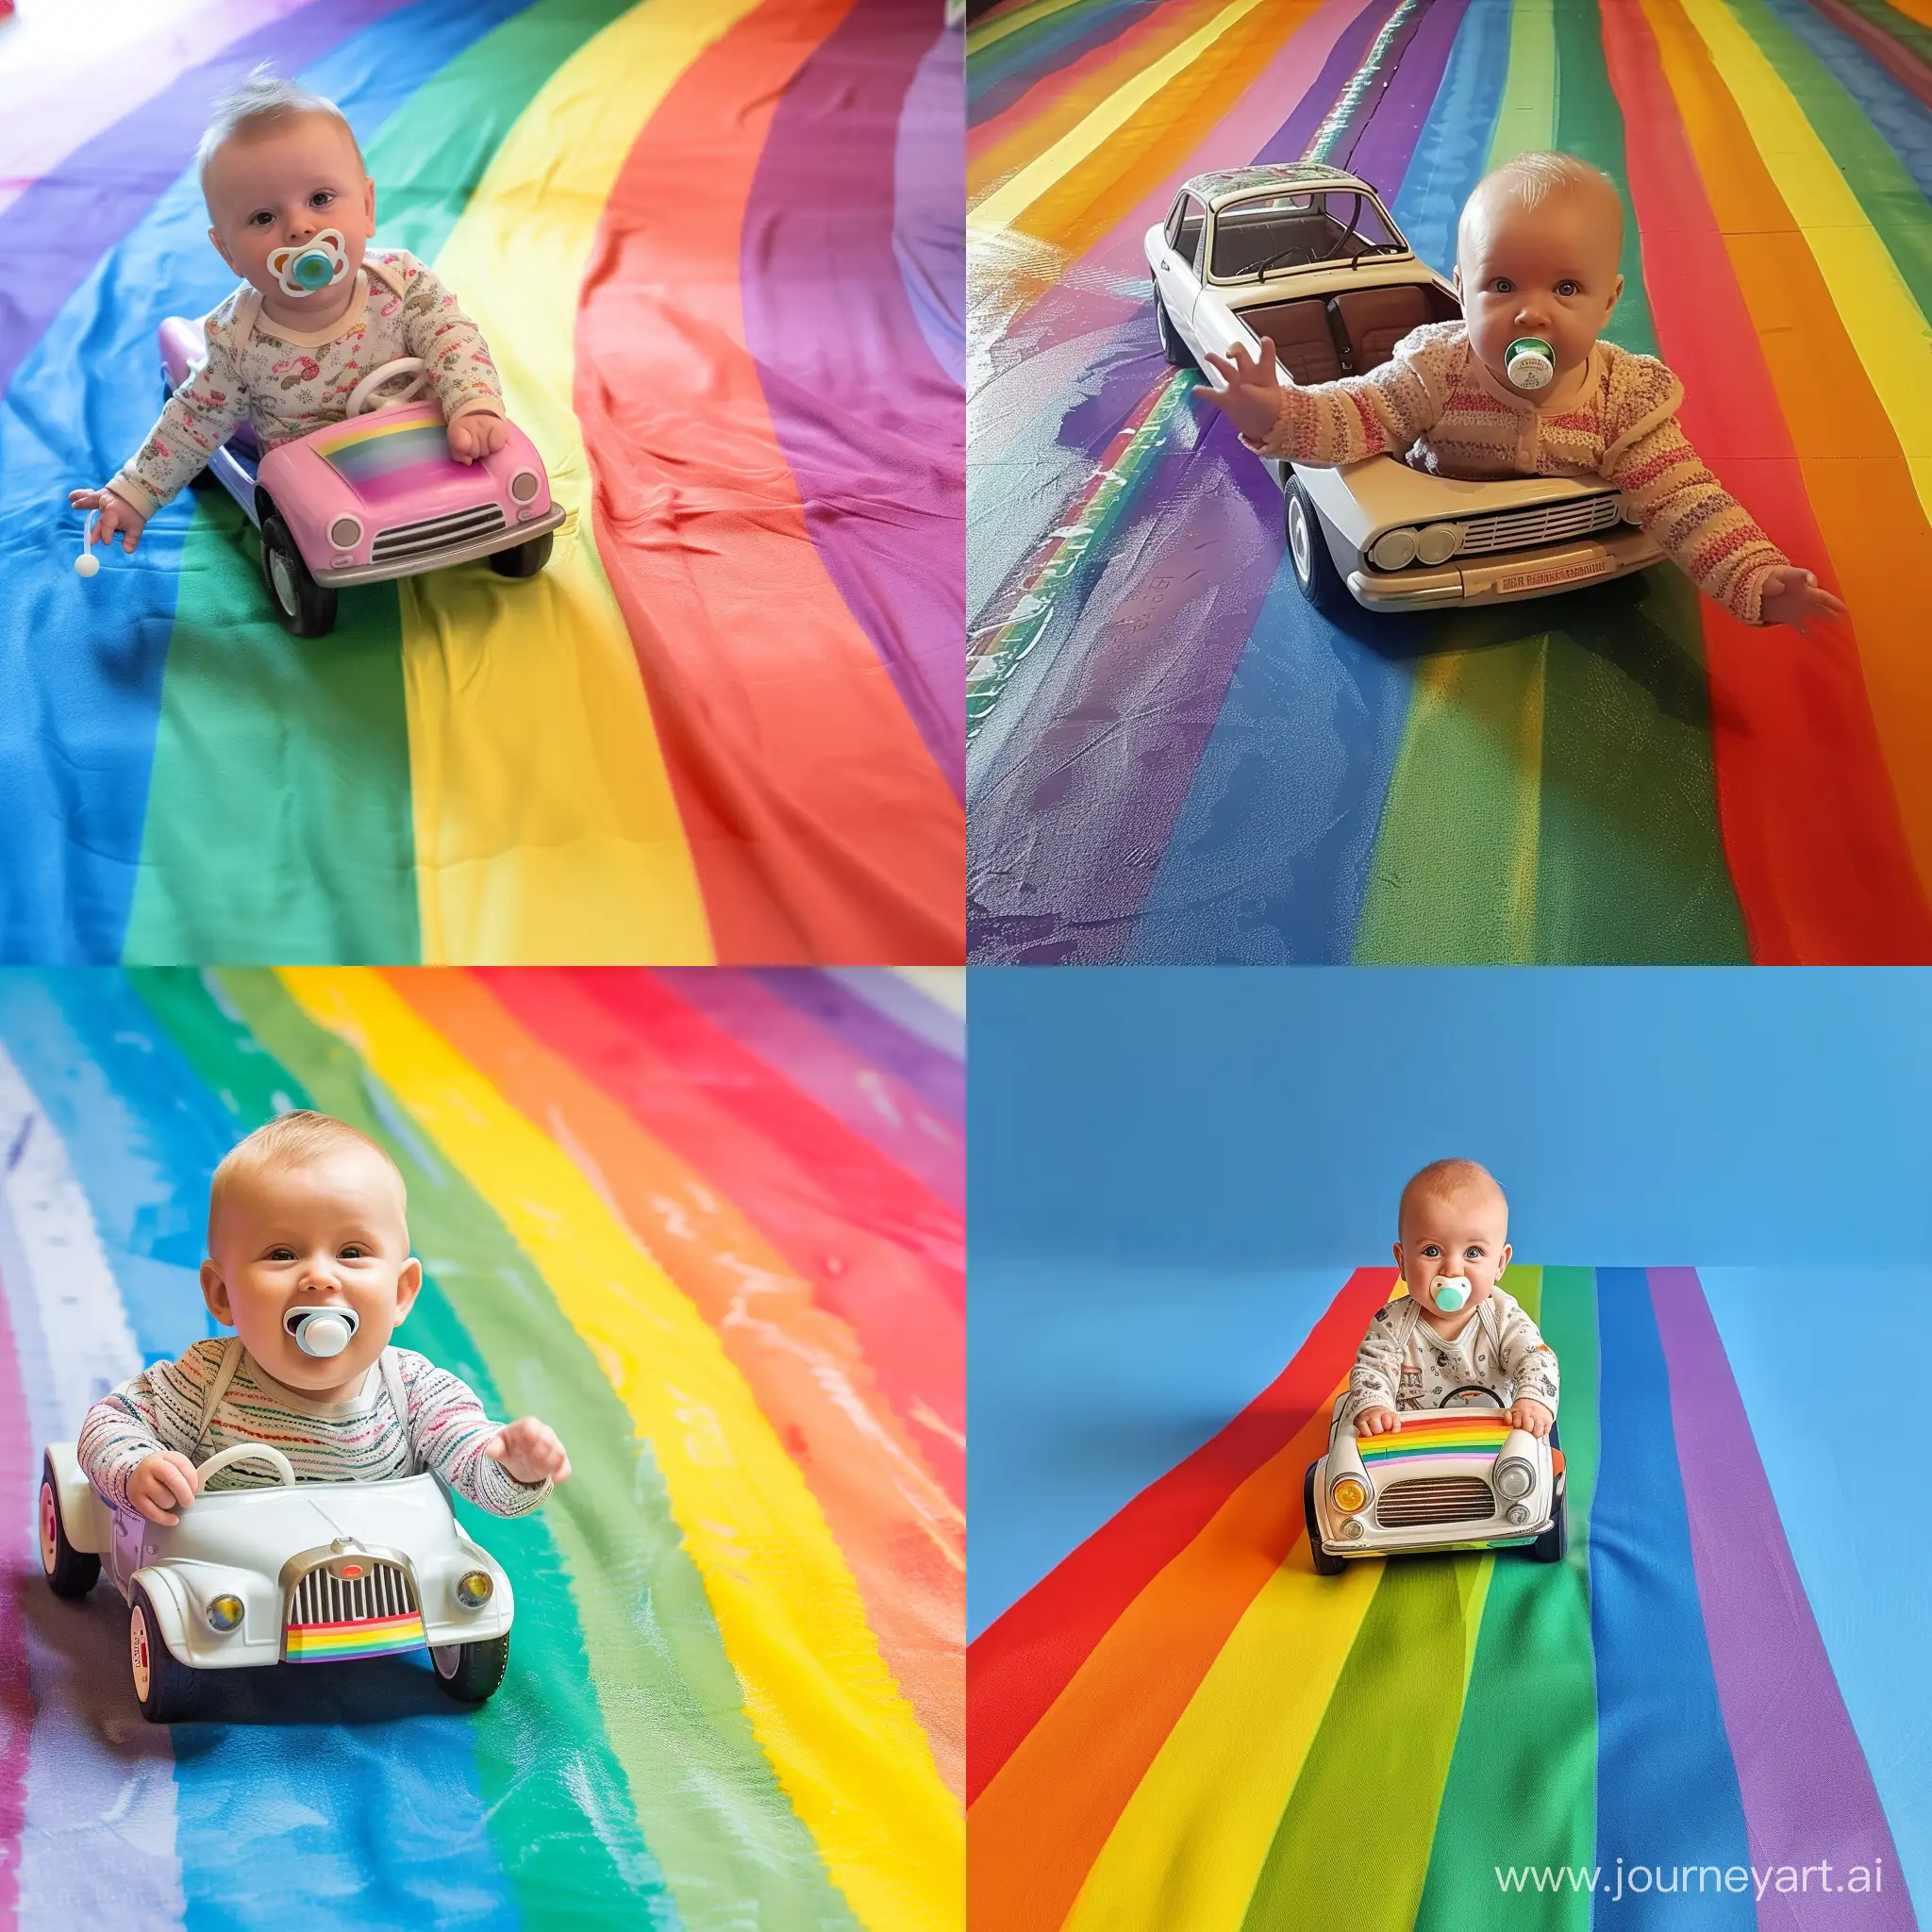 Adorable-Baby-Driving-Toy-Car-on-Colorful-Rainbow